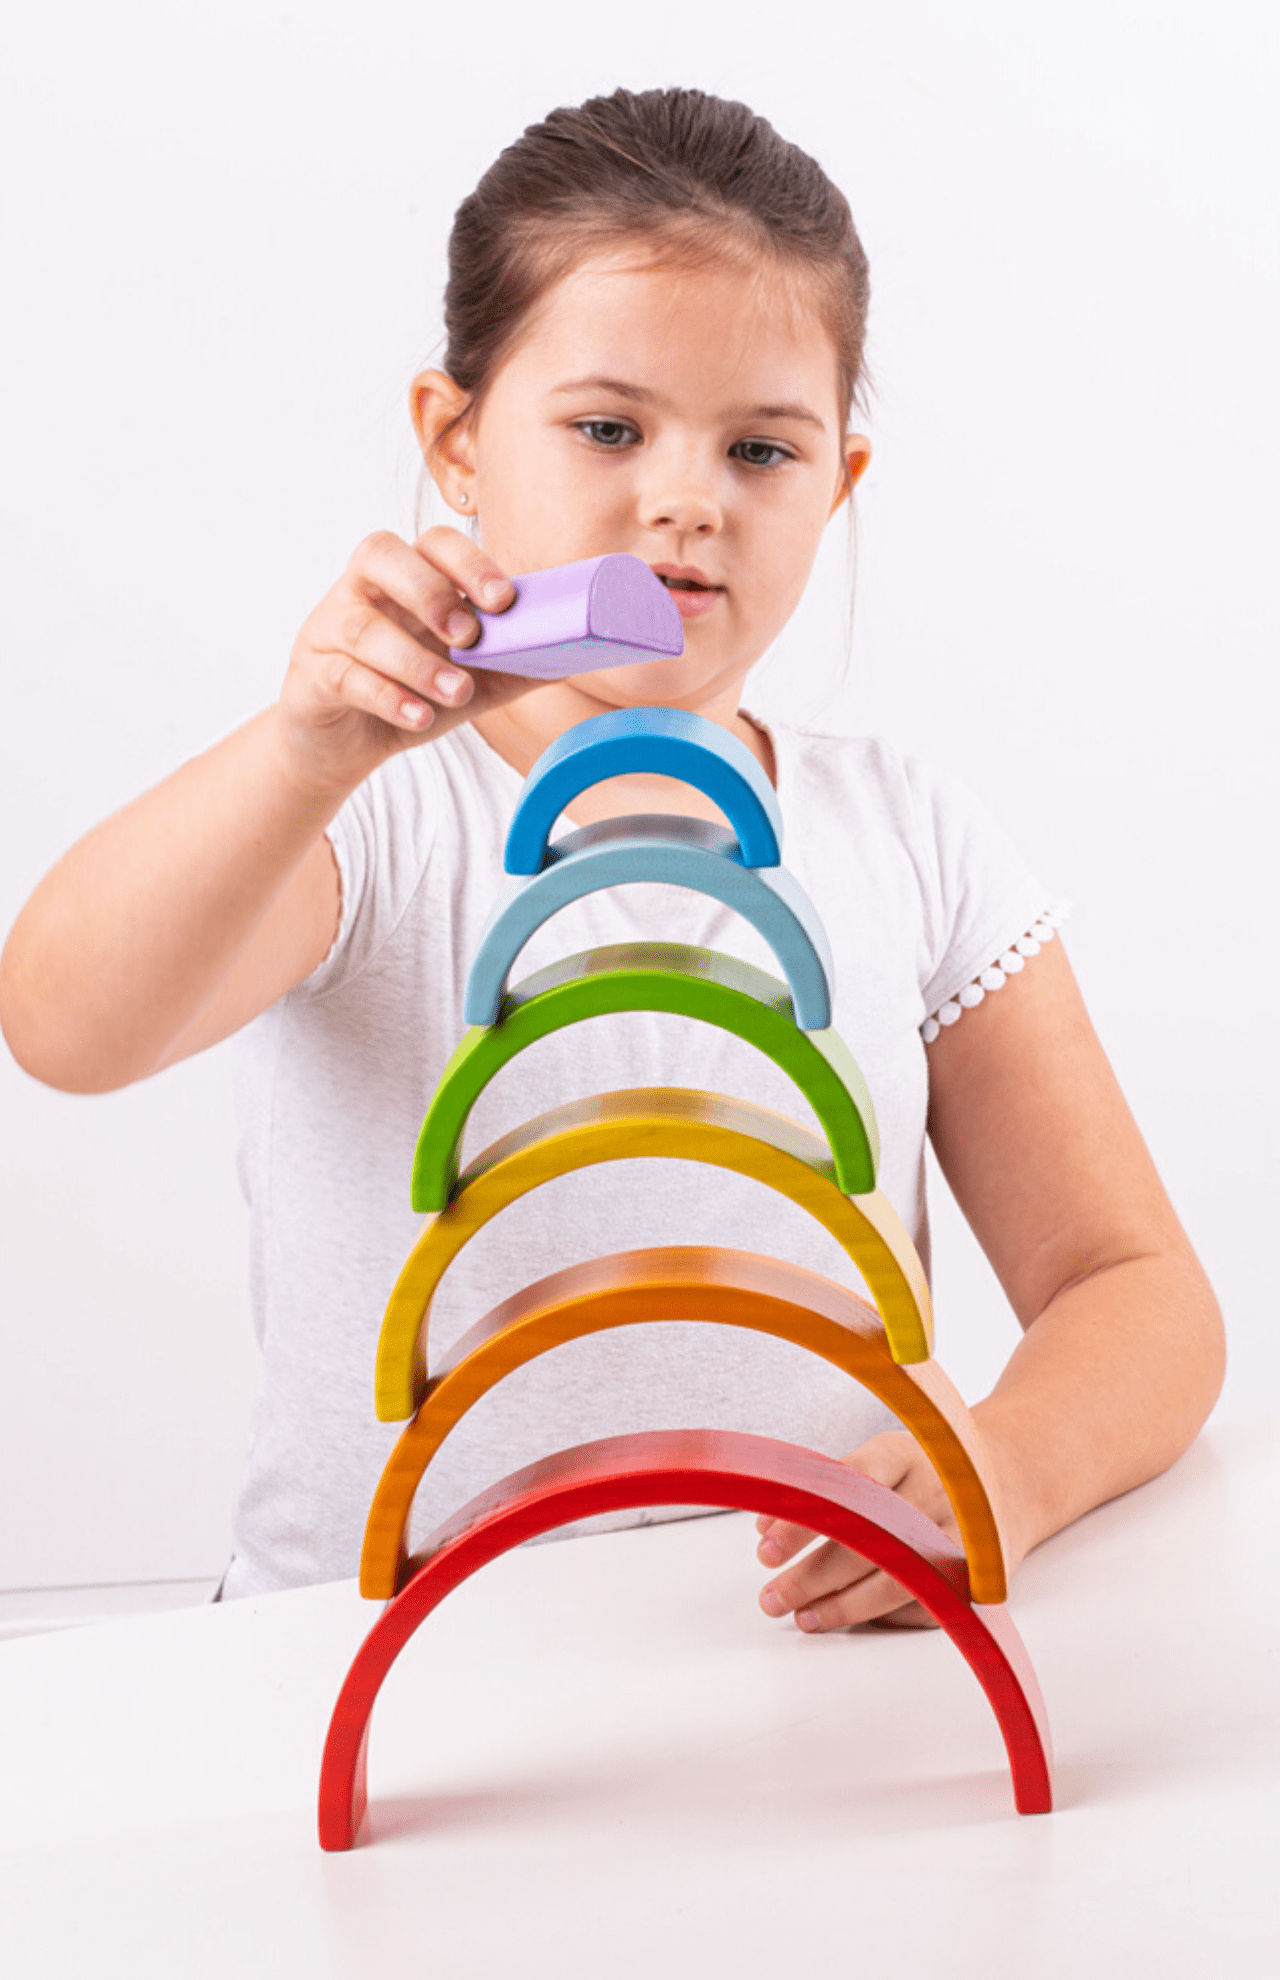 Girl stacking rainbow arches.